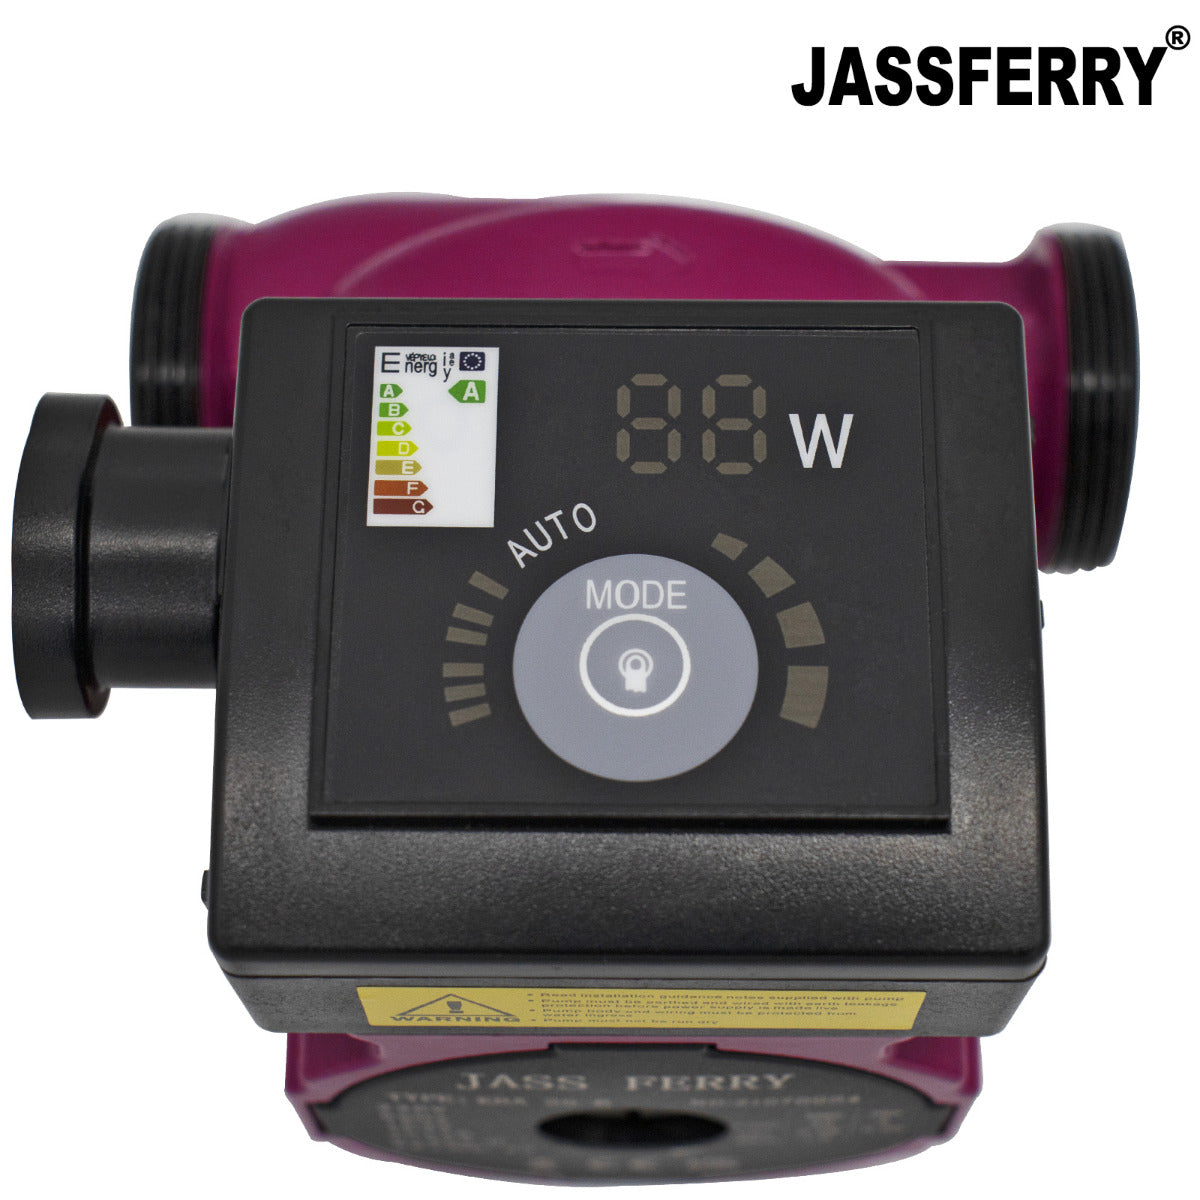 JassferryJASSFERRY A-Rated Central Heating Pump Energy Saving Circulation with Power MonitorHeating Pumps